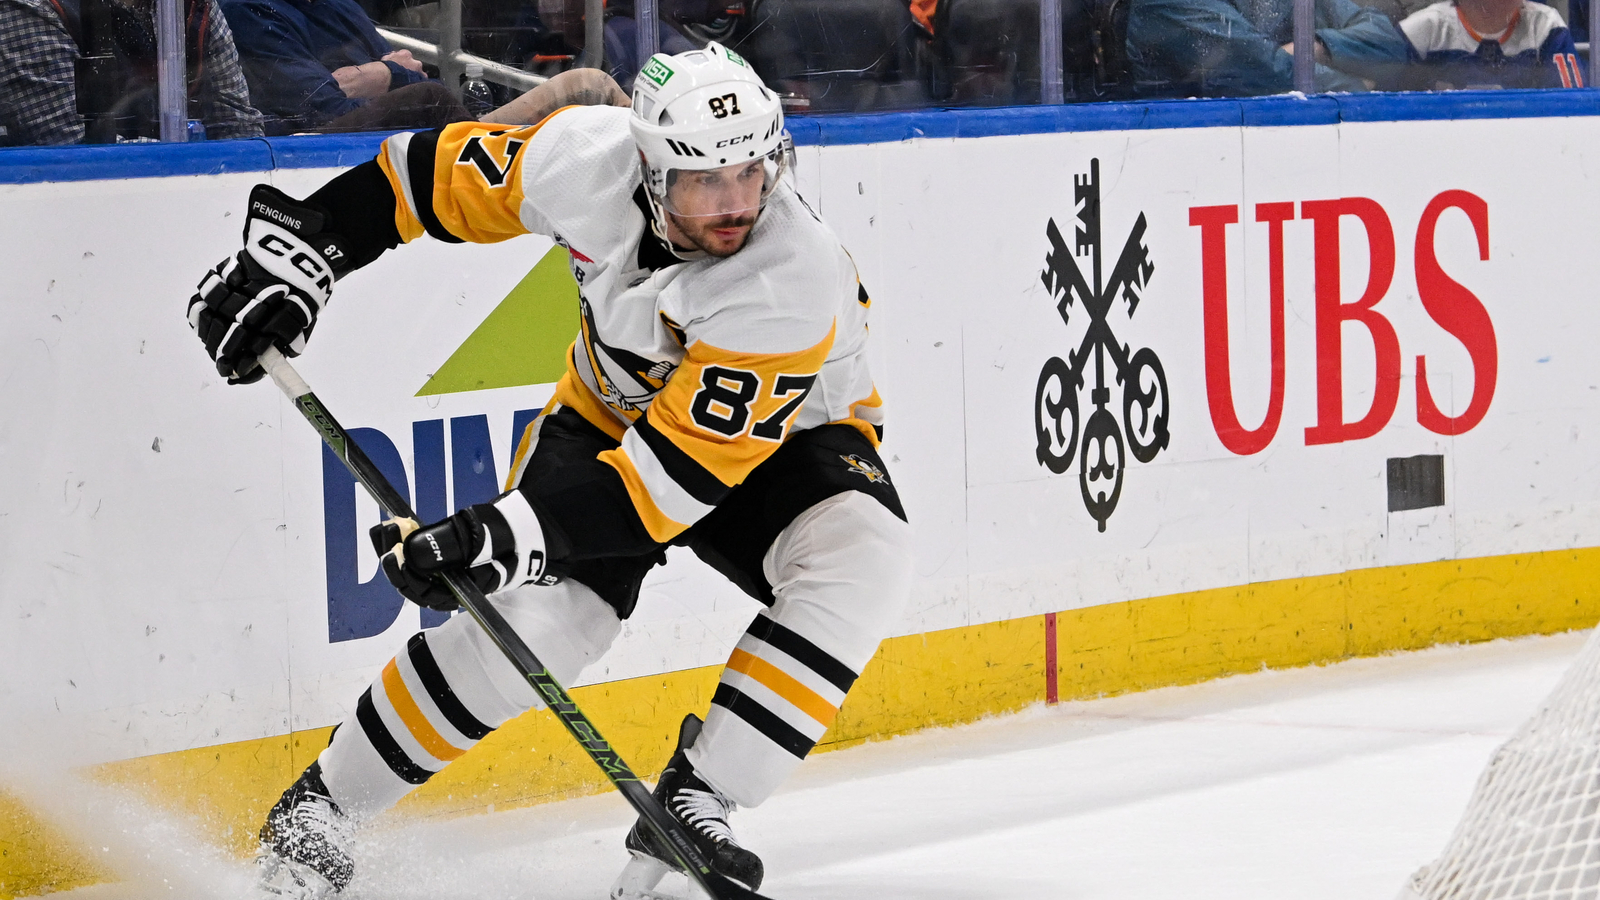 Extending Crosby’s contract could hurt the Penguins for a very long time